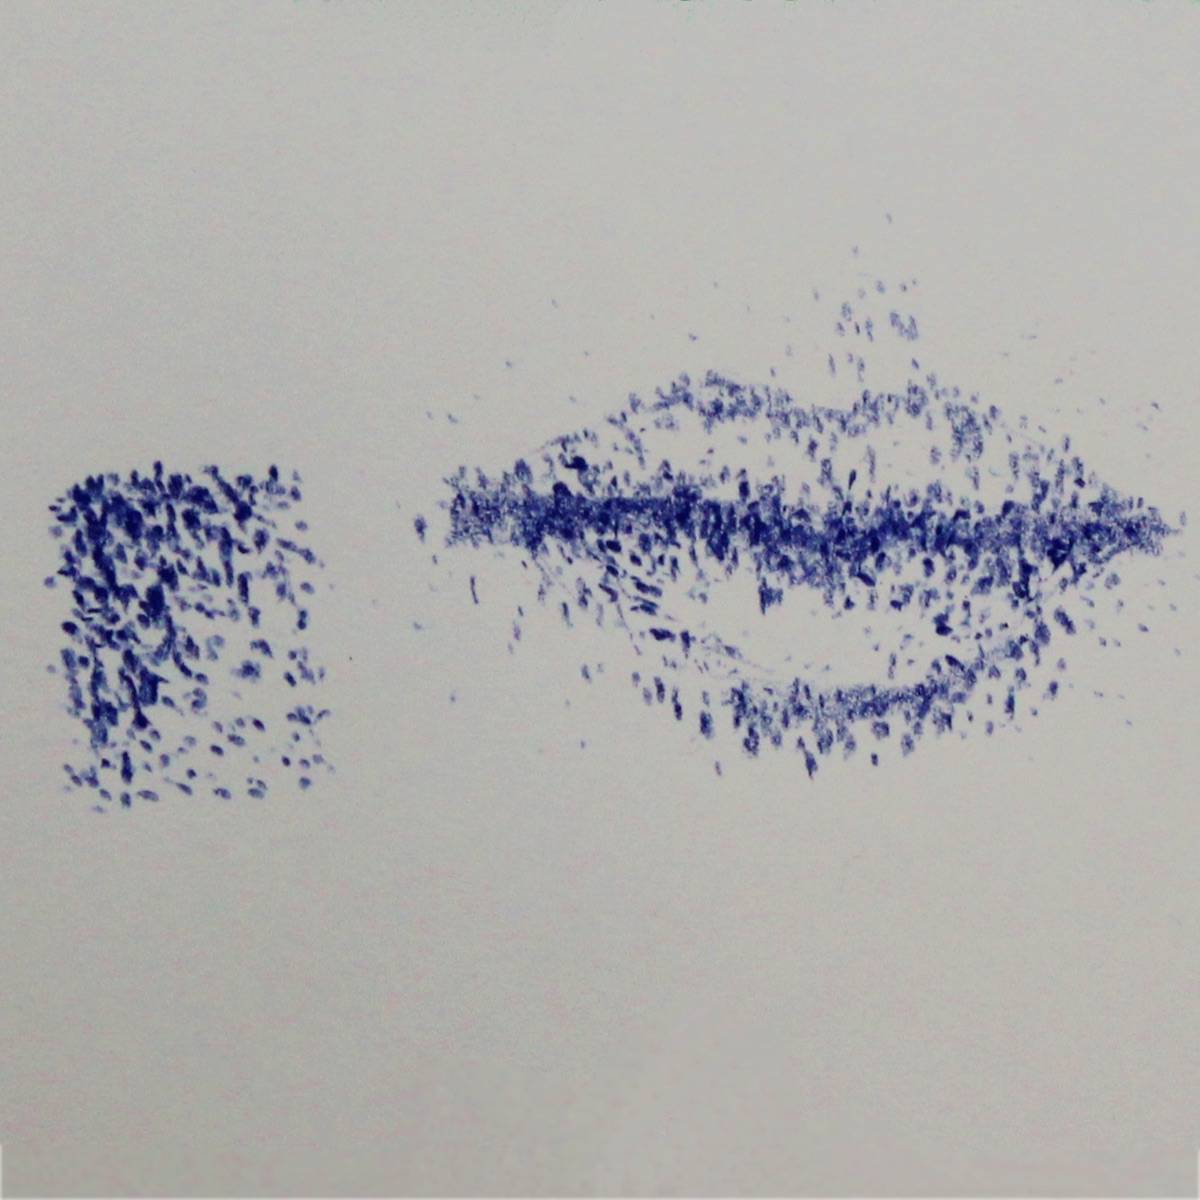 Dark blue colored pencil stippling dots shade in and create the form of human lips.